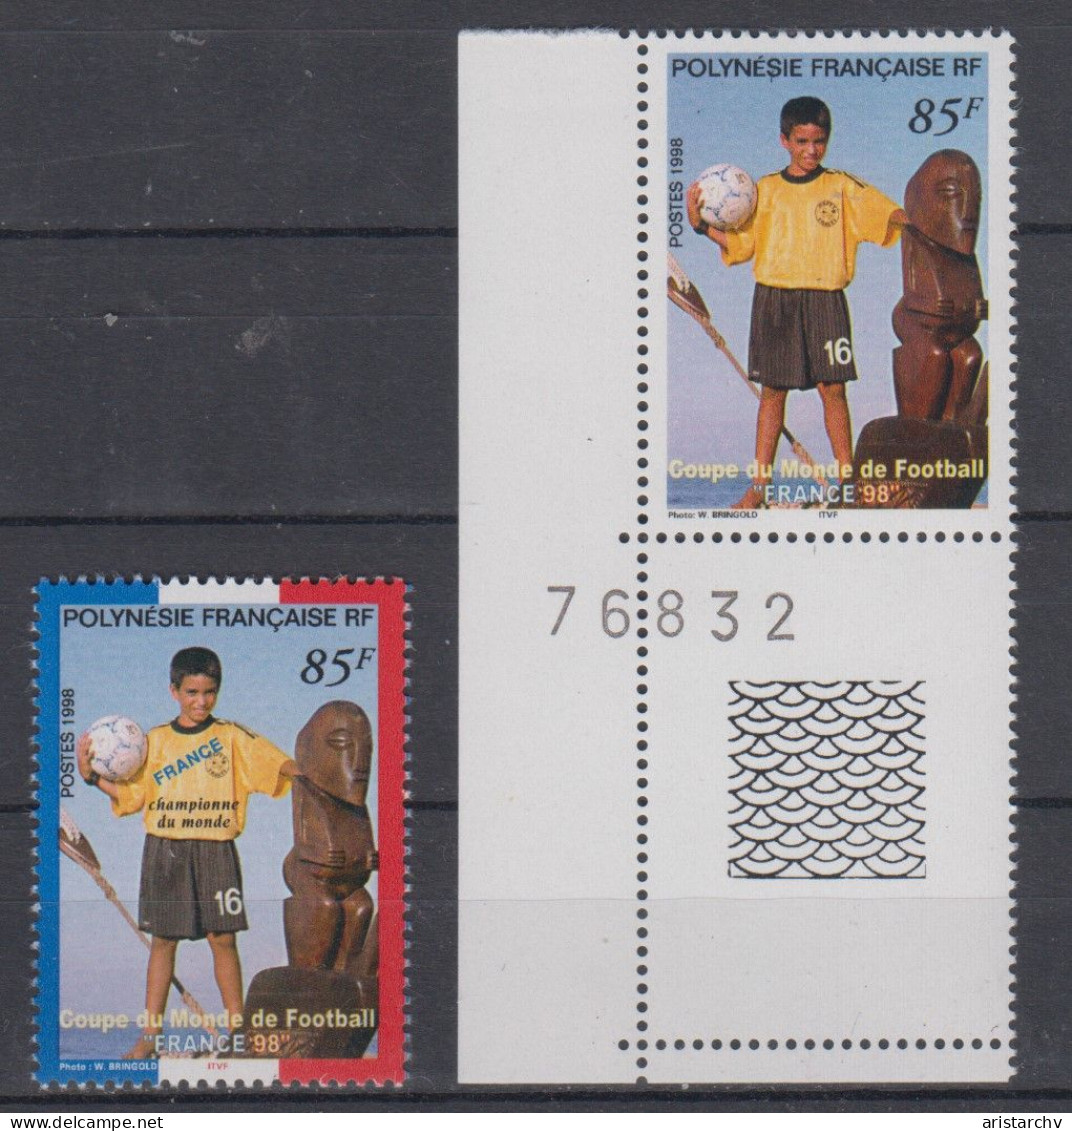 FRENCH POLYNESIA 1998 FOOTBALL WORLD CUP 2 STAMPS 1 WITH OVERPRINT - 1998 – France